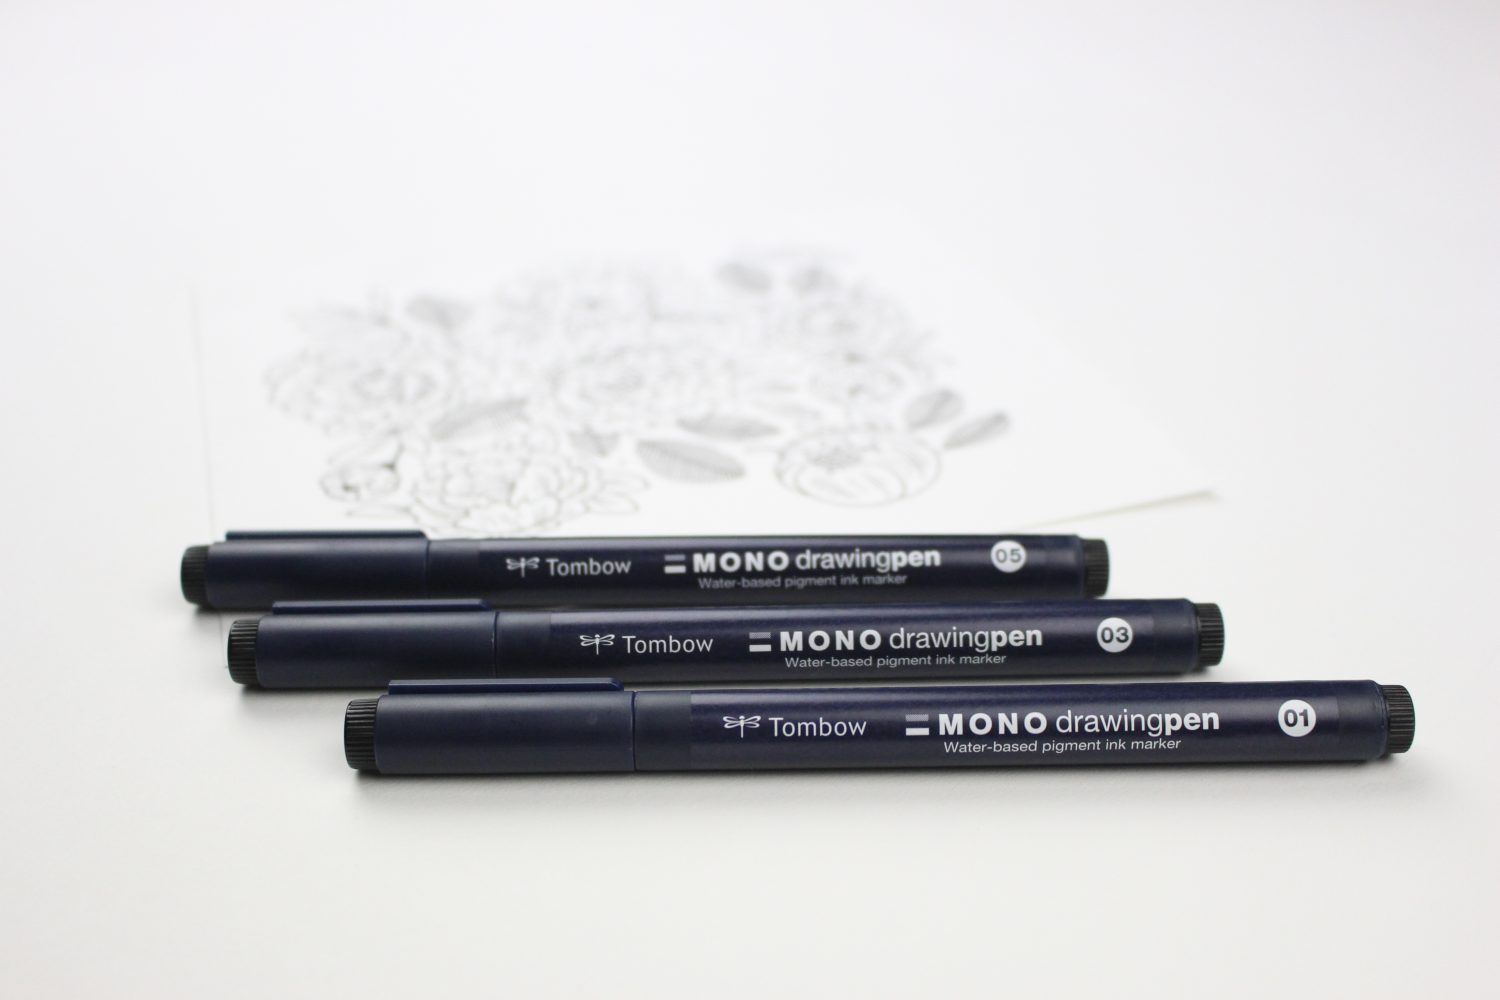 Introducing Tombow's MONO Drawing Pen! This drawing pen comes in 3 tip sizes and is perfect for art, illustration, lettering and journaling.